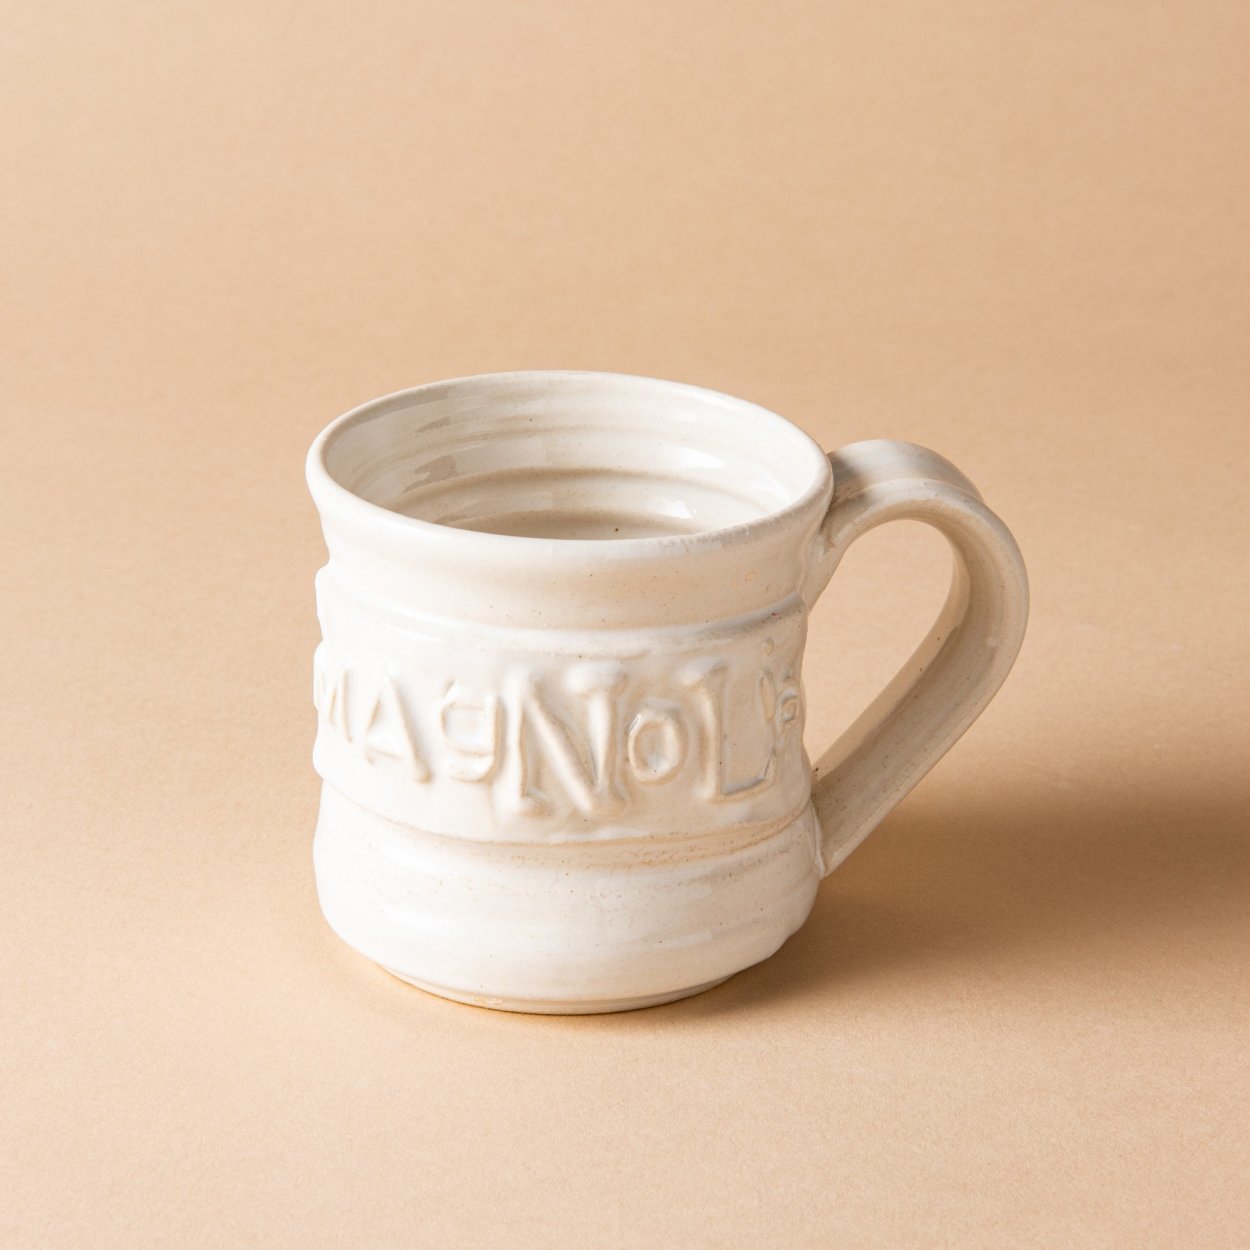 26 of the Most Unique Coffee Mugs to Add to Your Collection